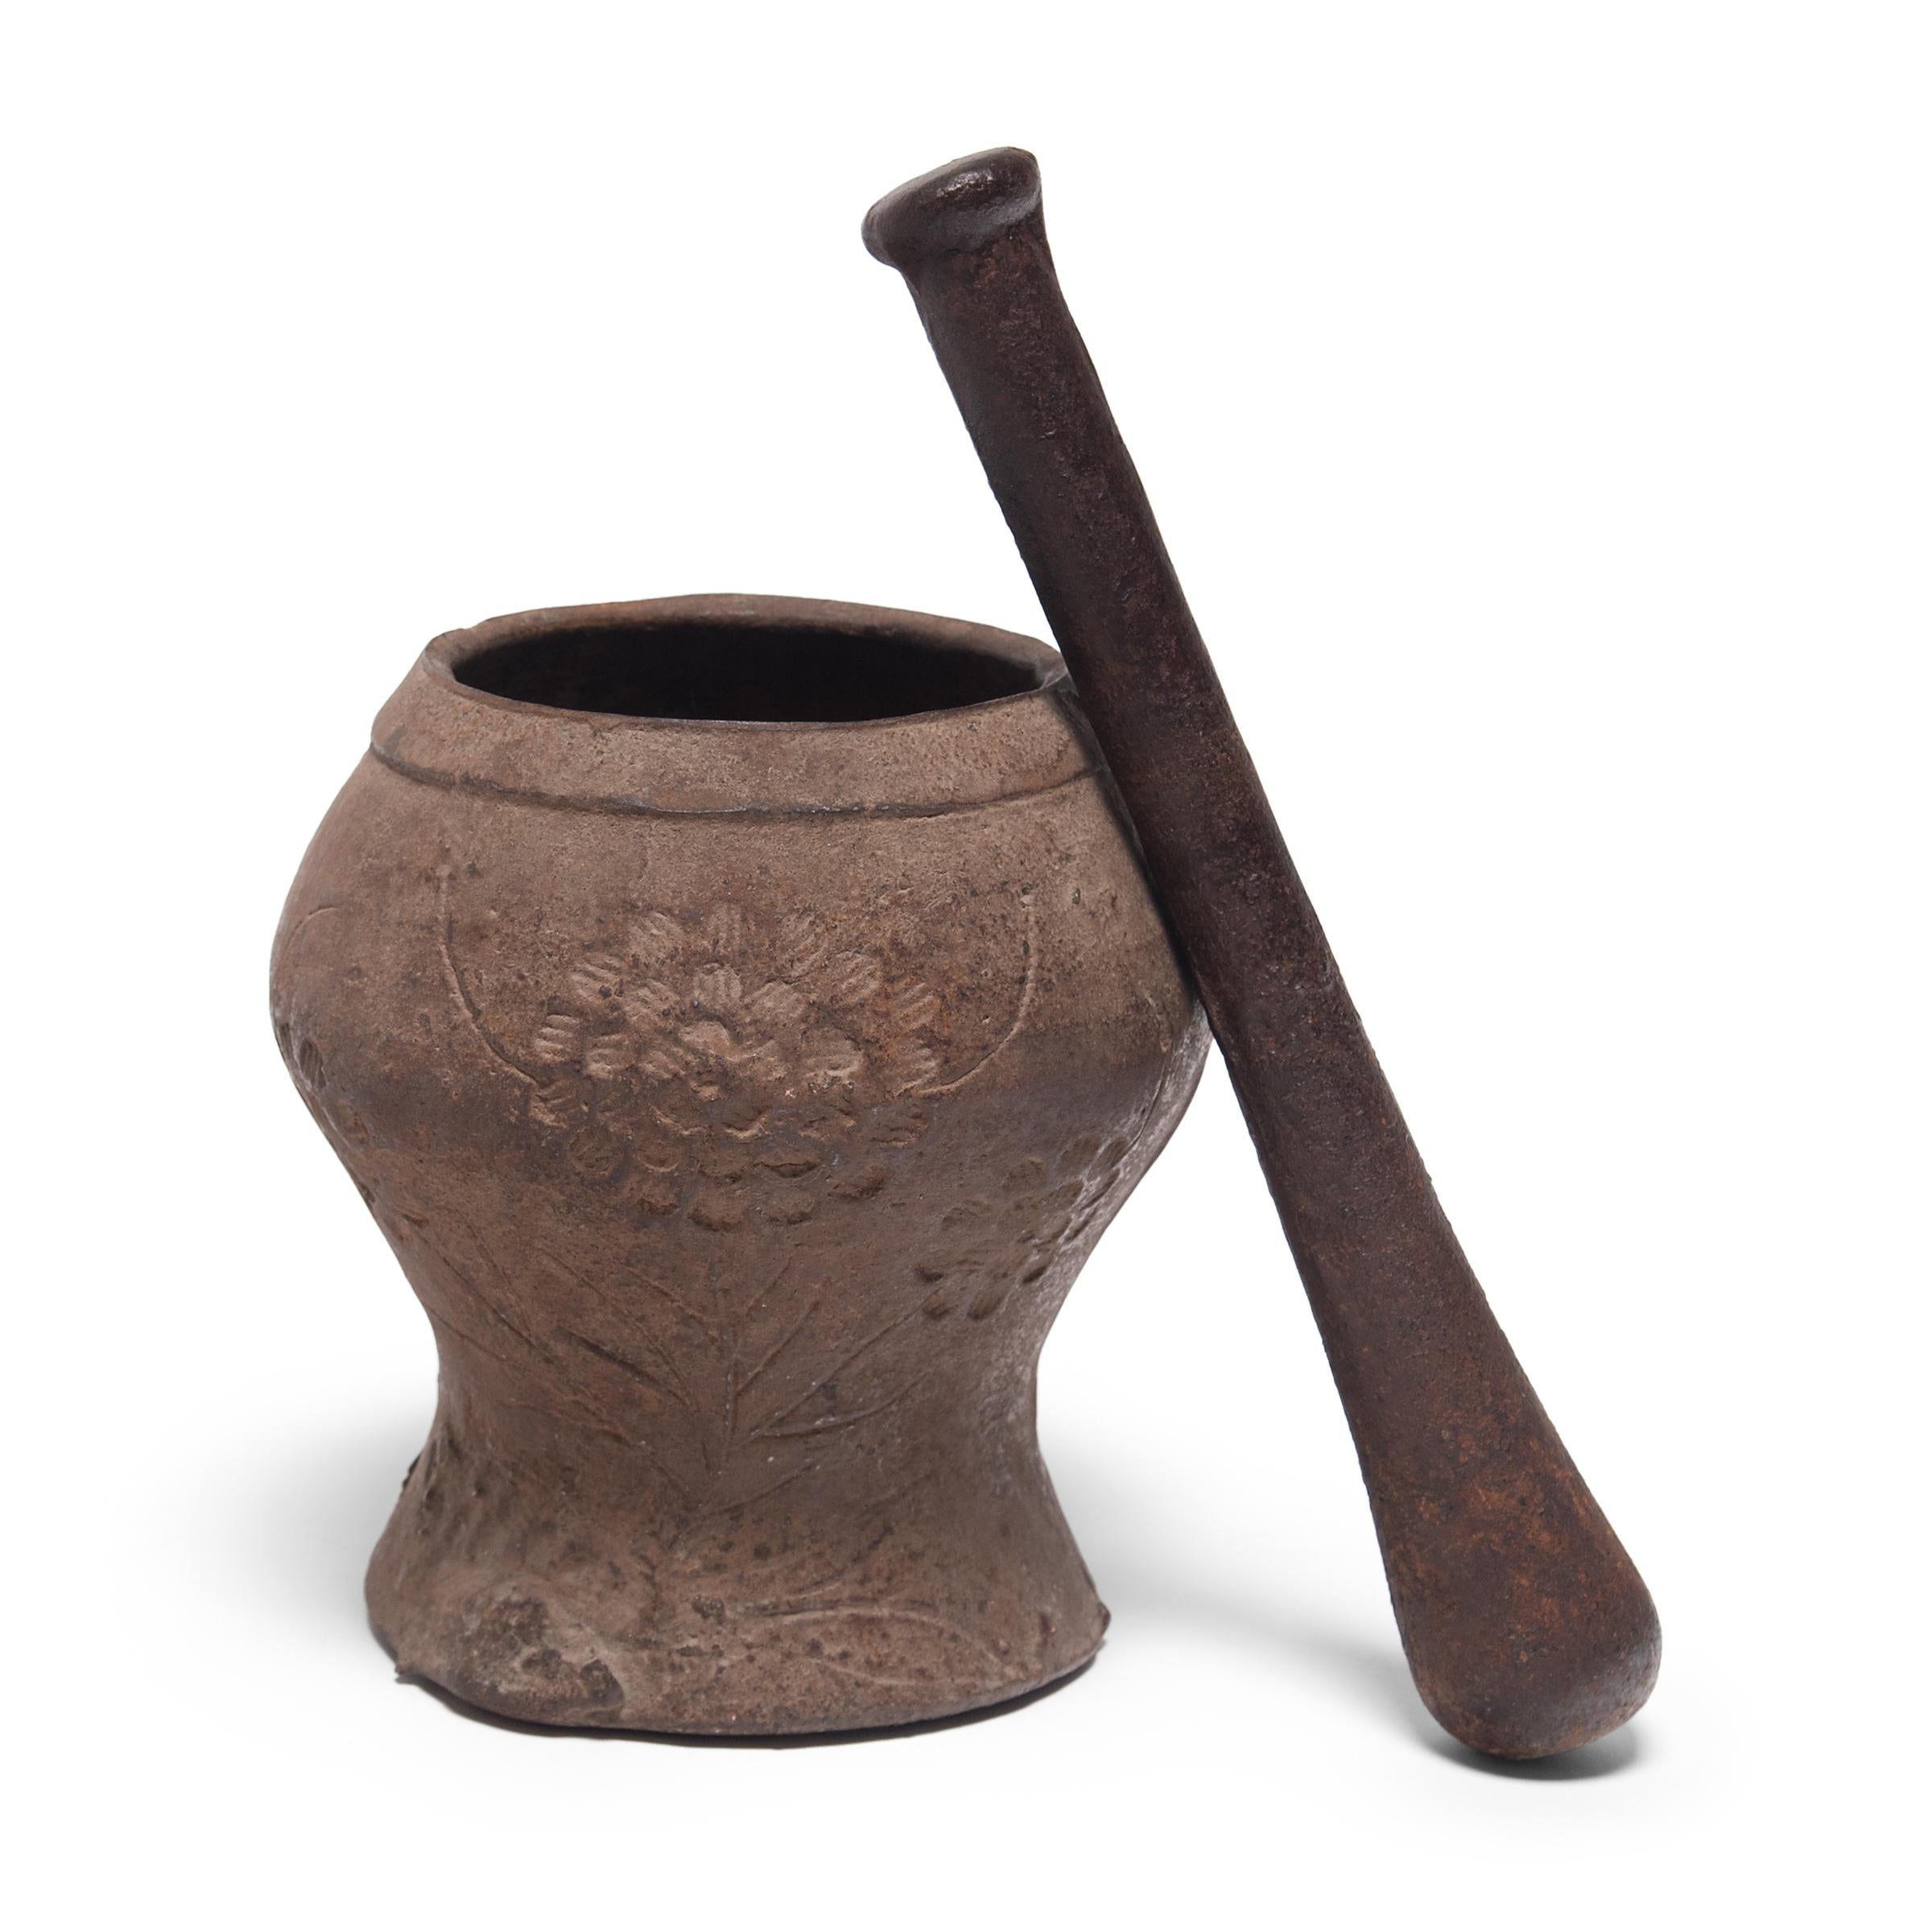 This vintage mortar and pestle from Shanxi, China was cast in iron with a floral relief. It was originally used in a traditional apothecary to create herbal medicine.